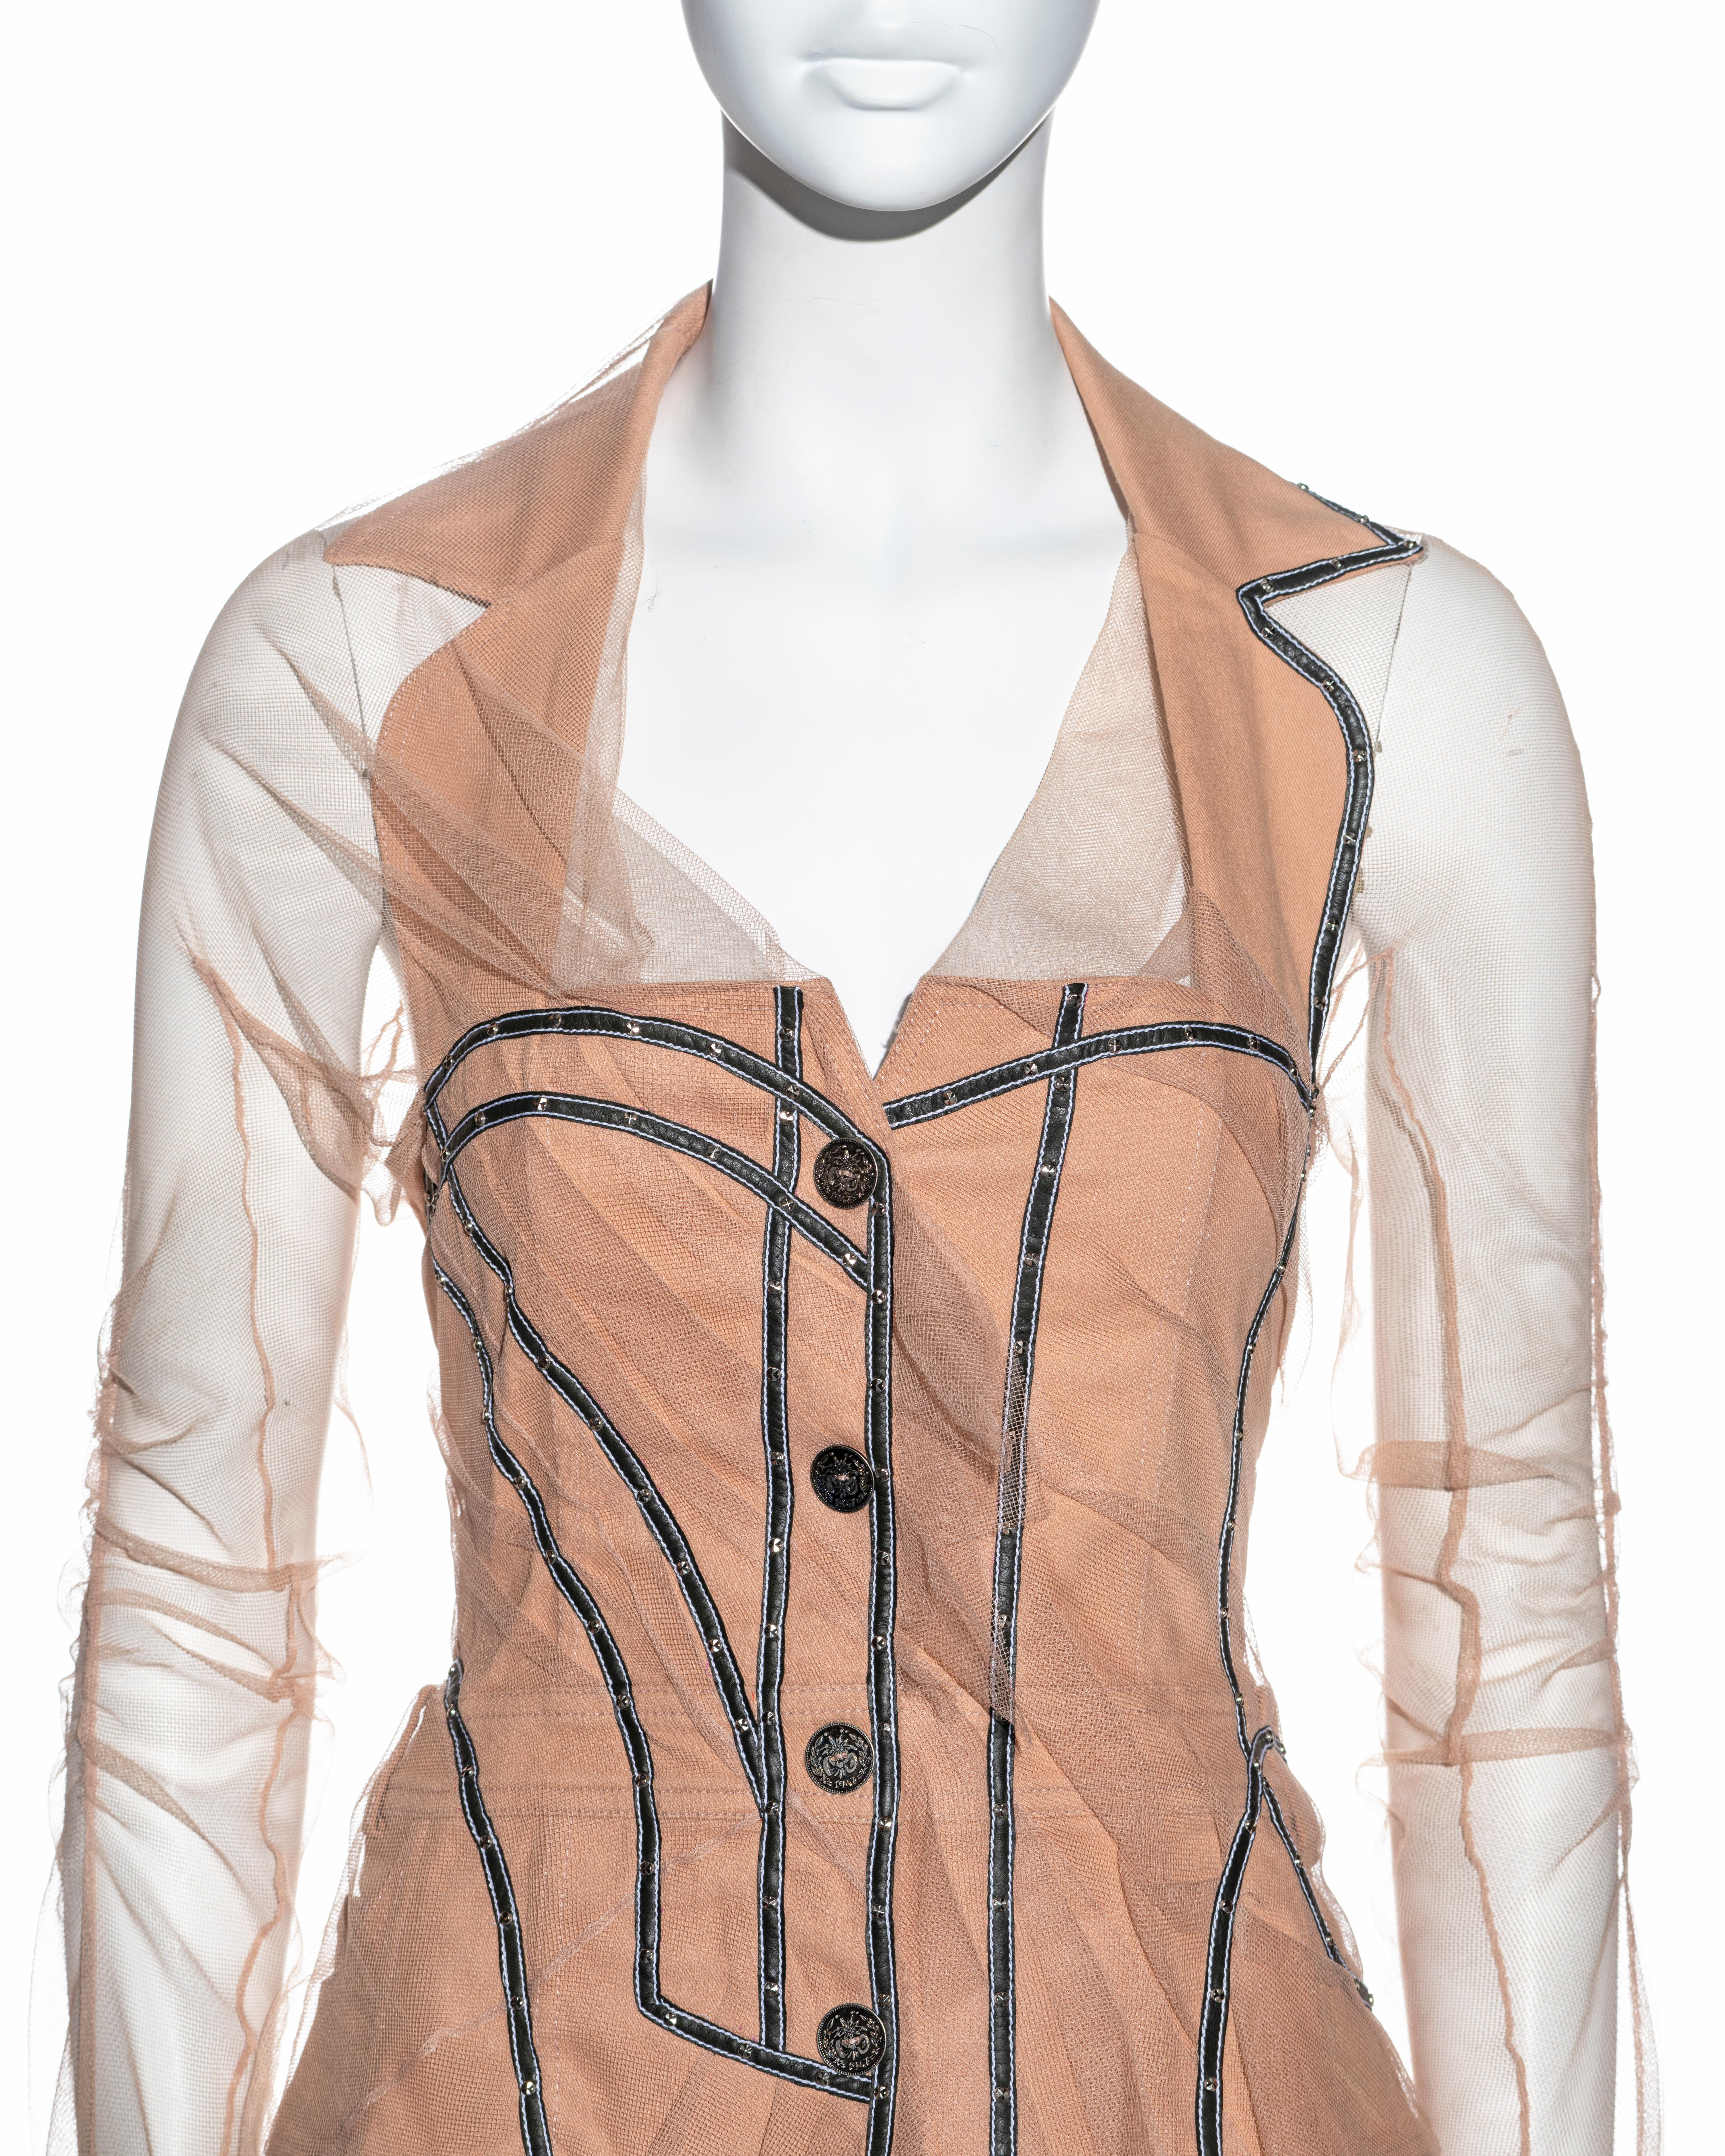 Beige Christian Dior by John Galliano deconstructed jacket with mesh overlay, ss 2006